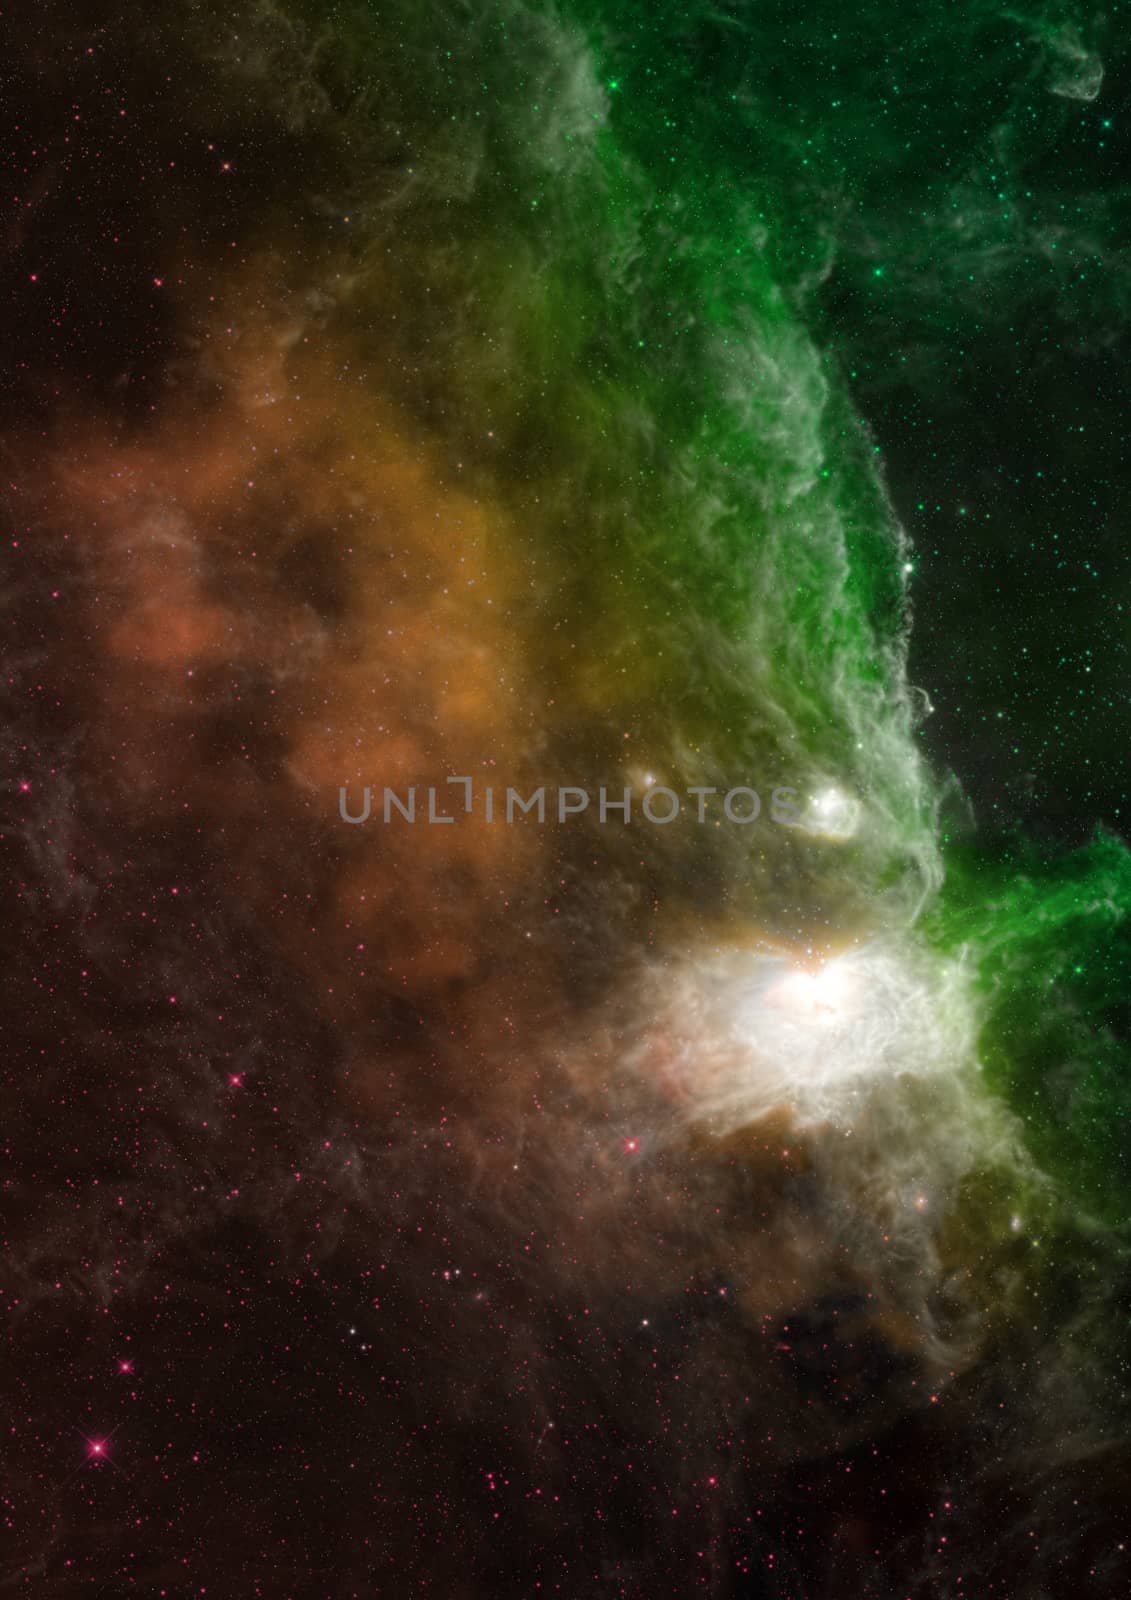 Far being shone nebula and star field against space. "Elements of this image furnished by NASA".